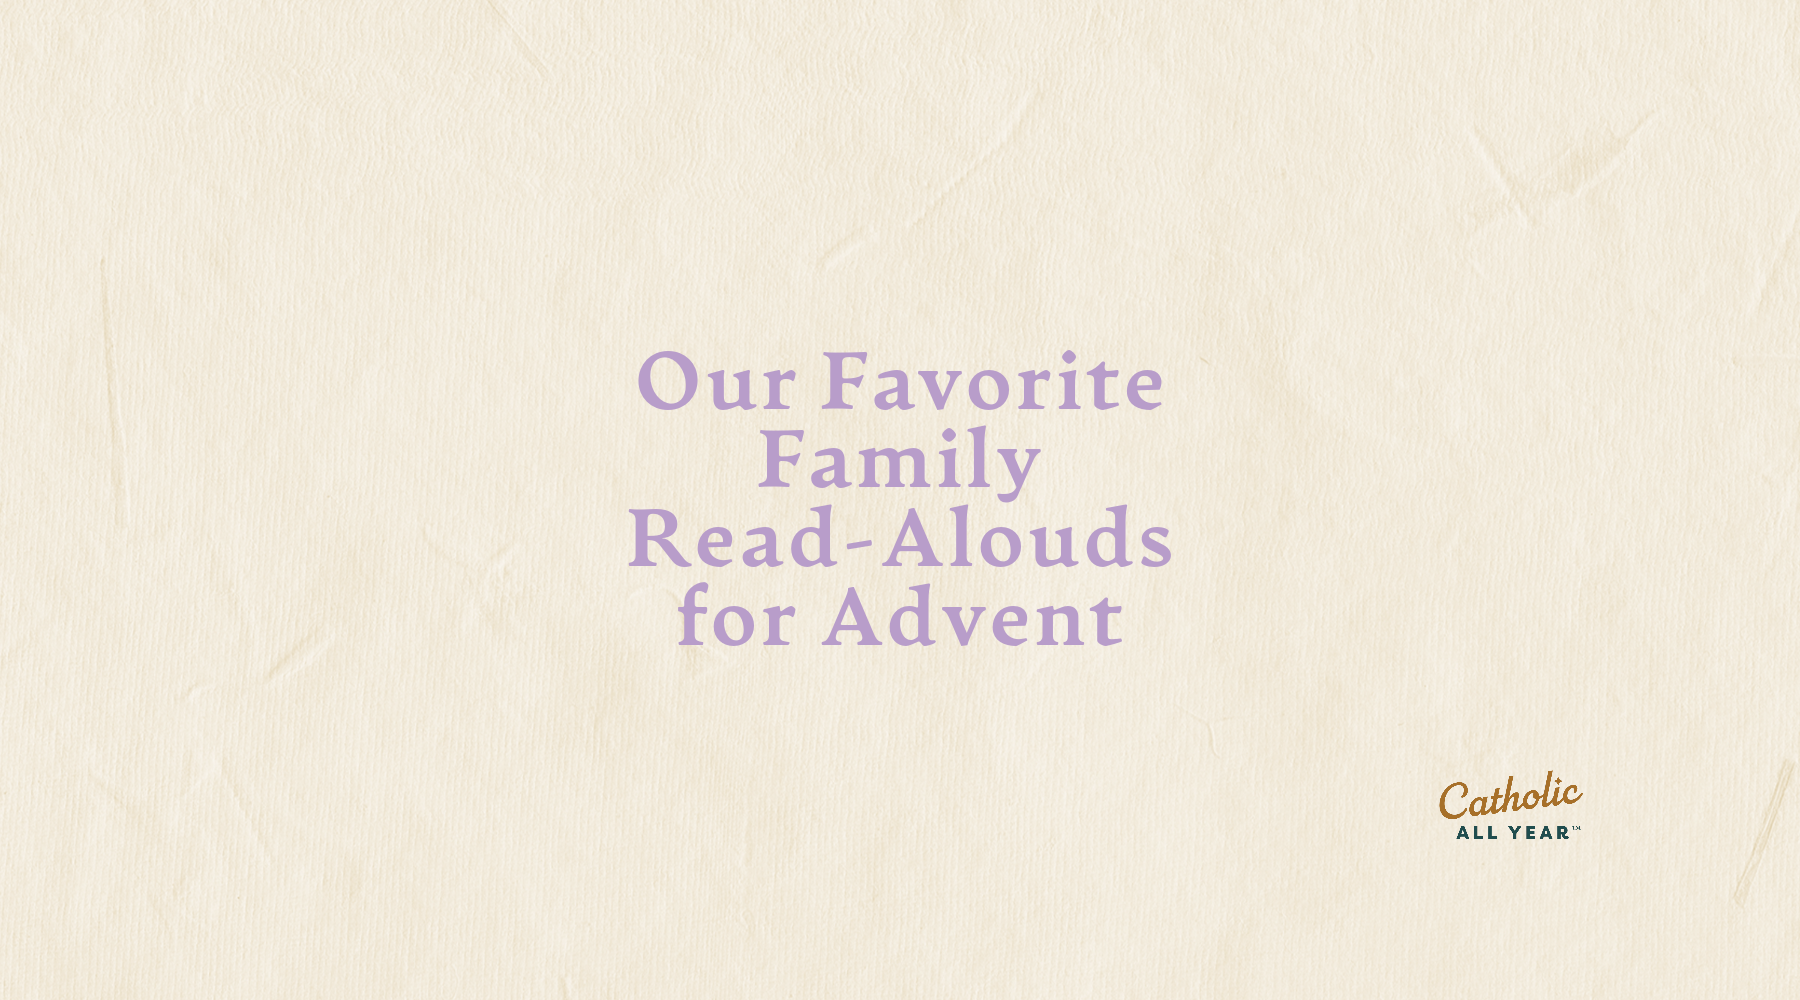 Our Favorite Family Read-Alouds for Advent